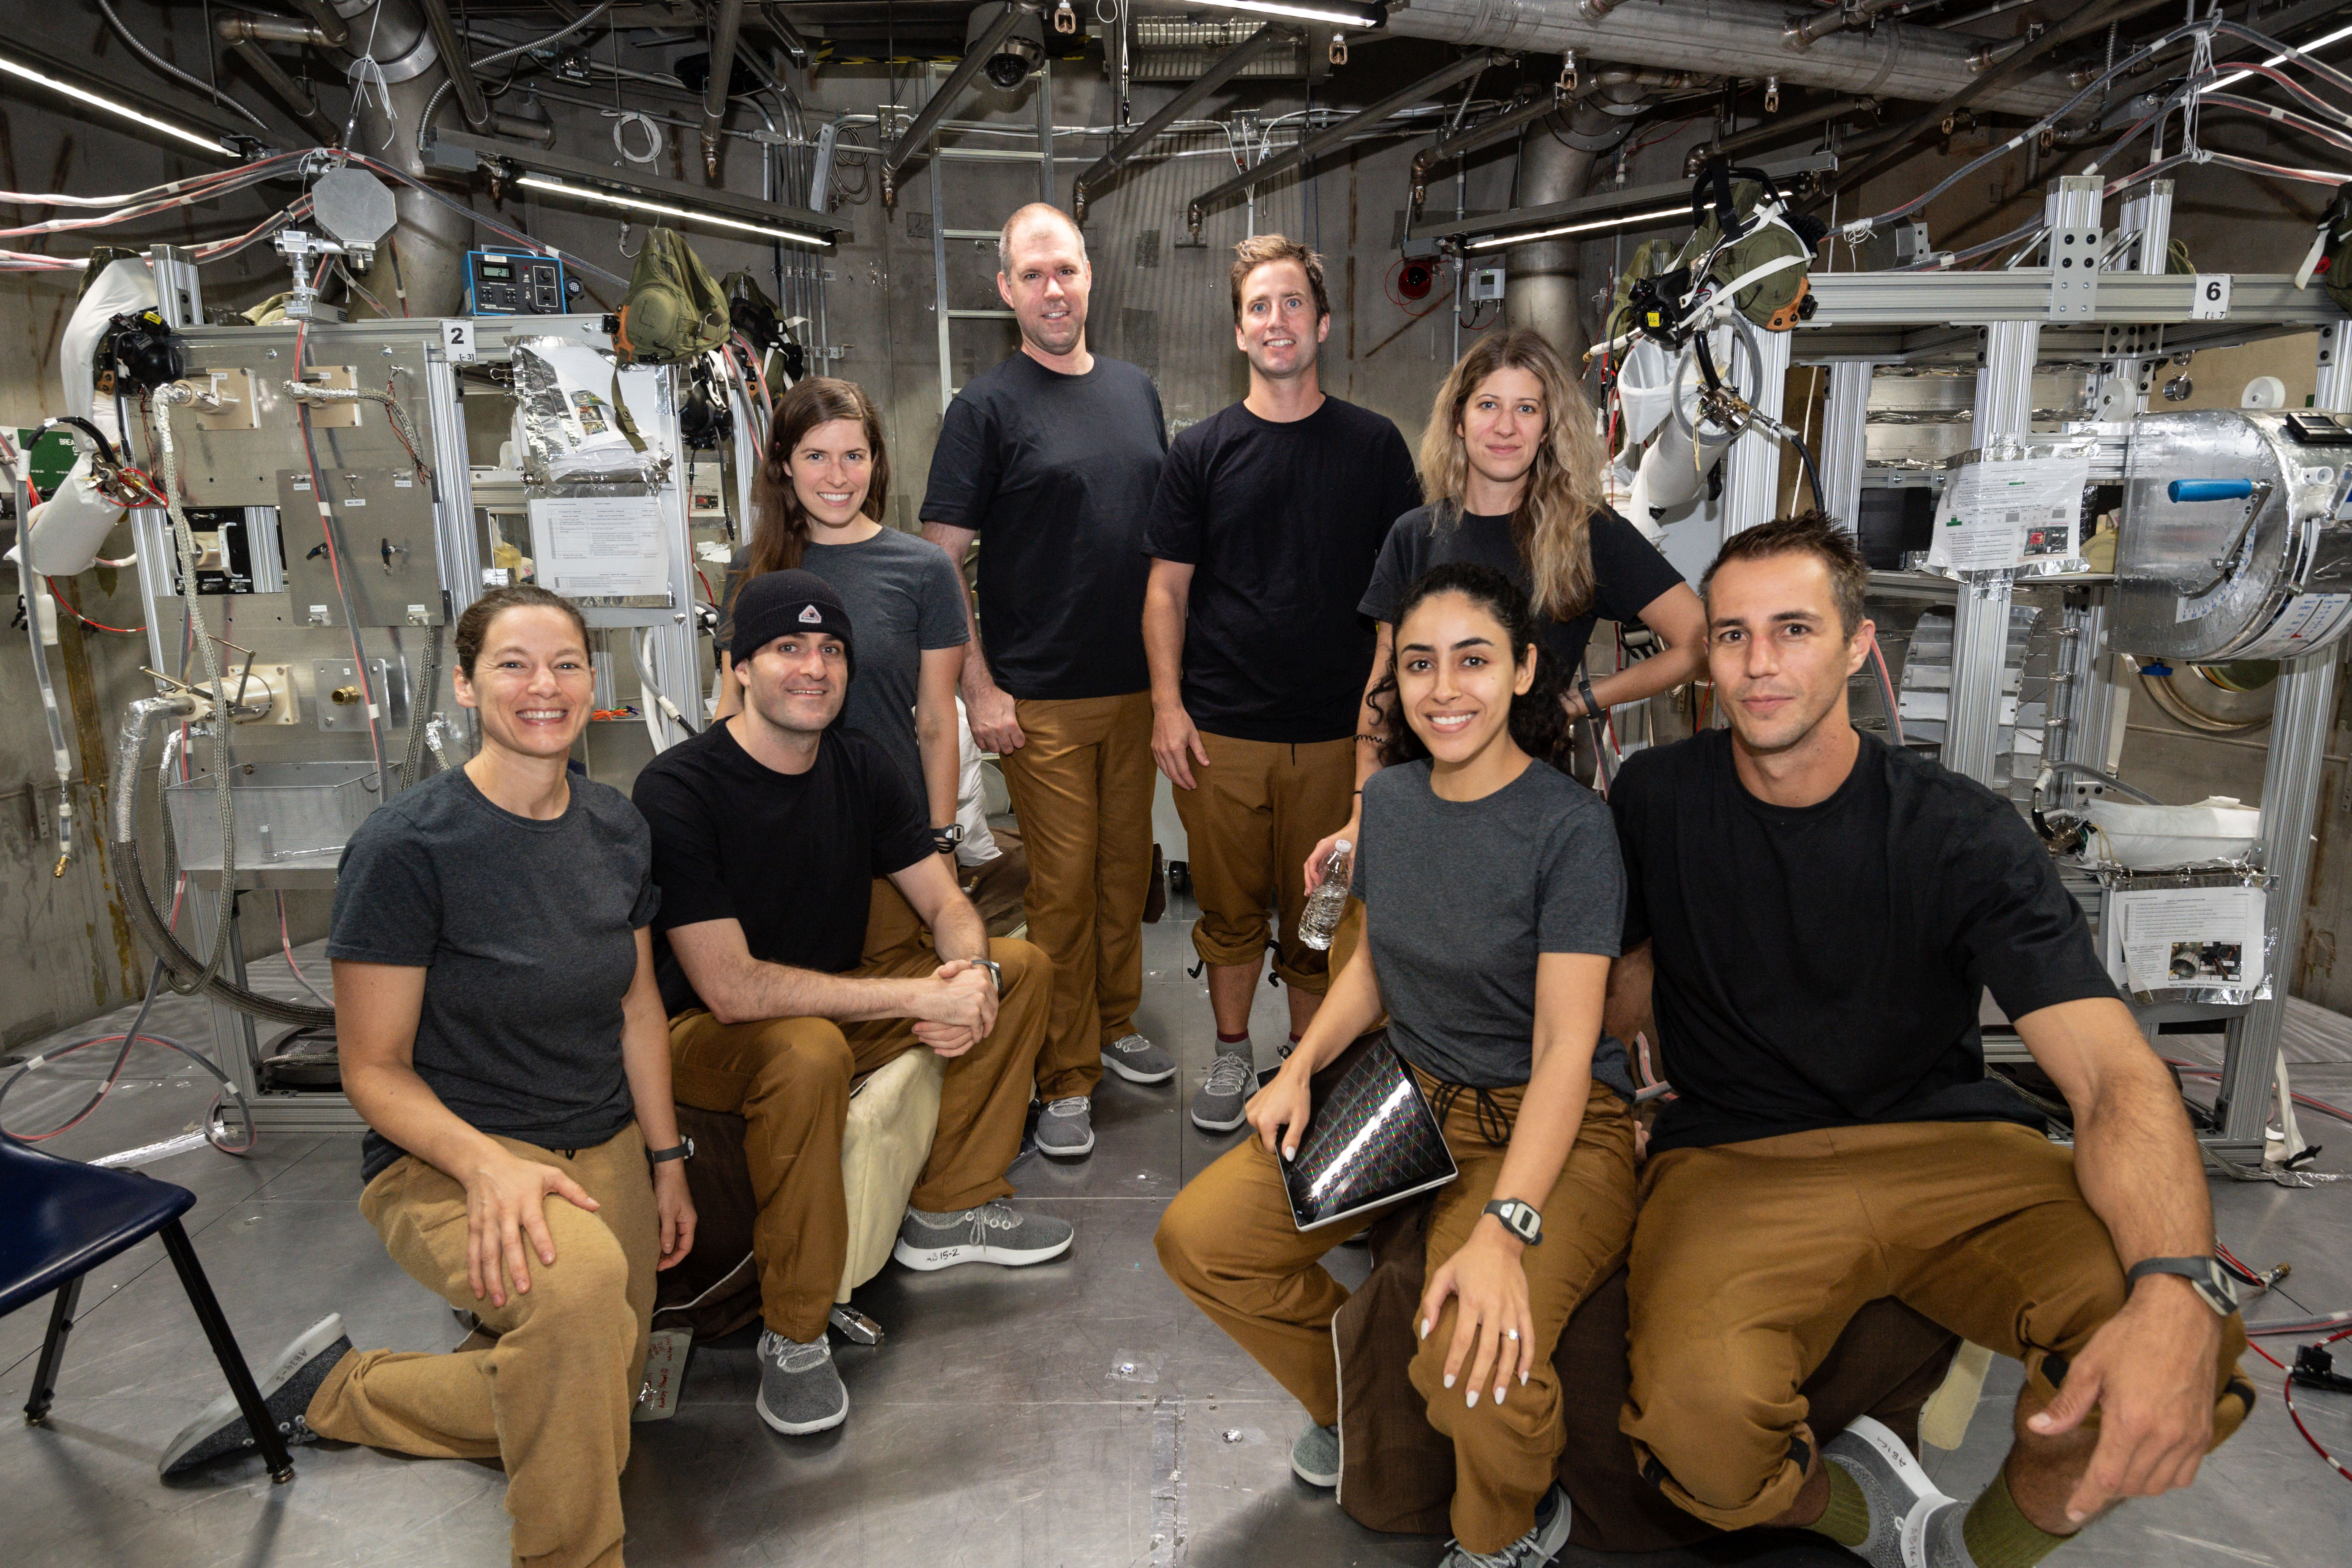 Th test participants of the 20-Foot Chamber 11-Day Manned Reduced Pressure Prebreathe Protocol Test pose for a group photo prior to egress on June 17, 2022.